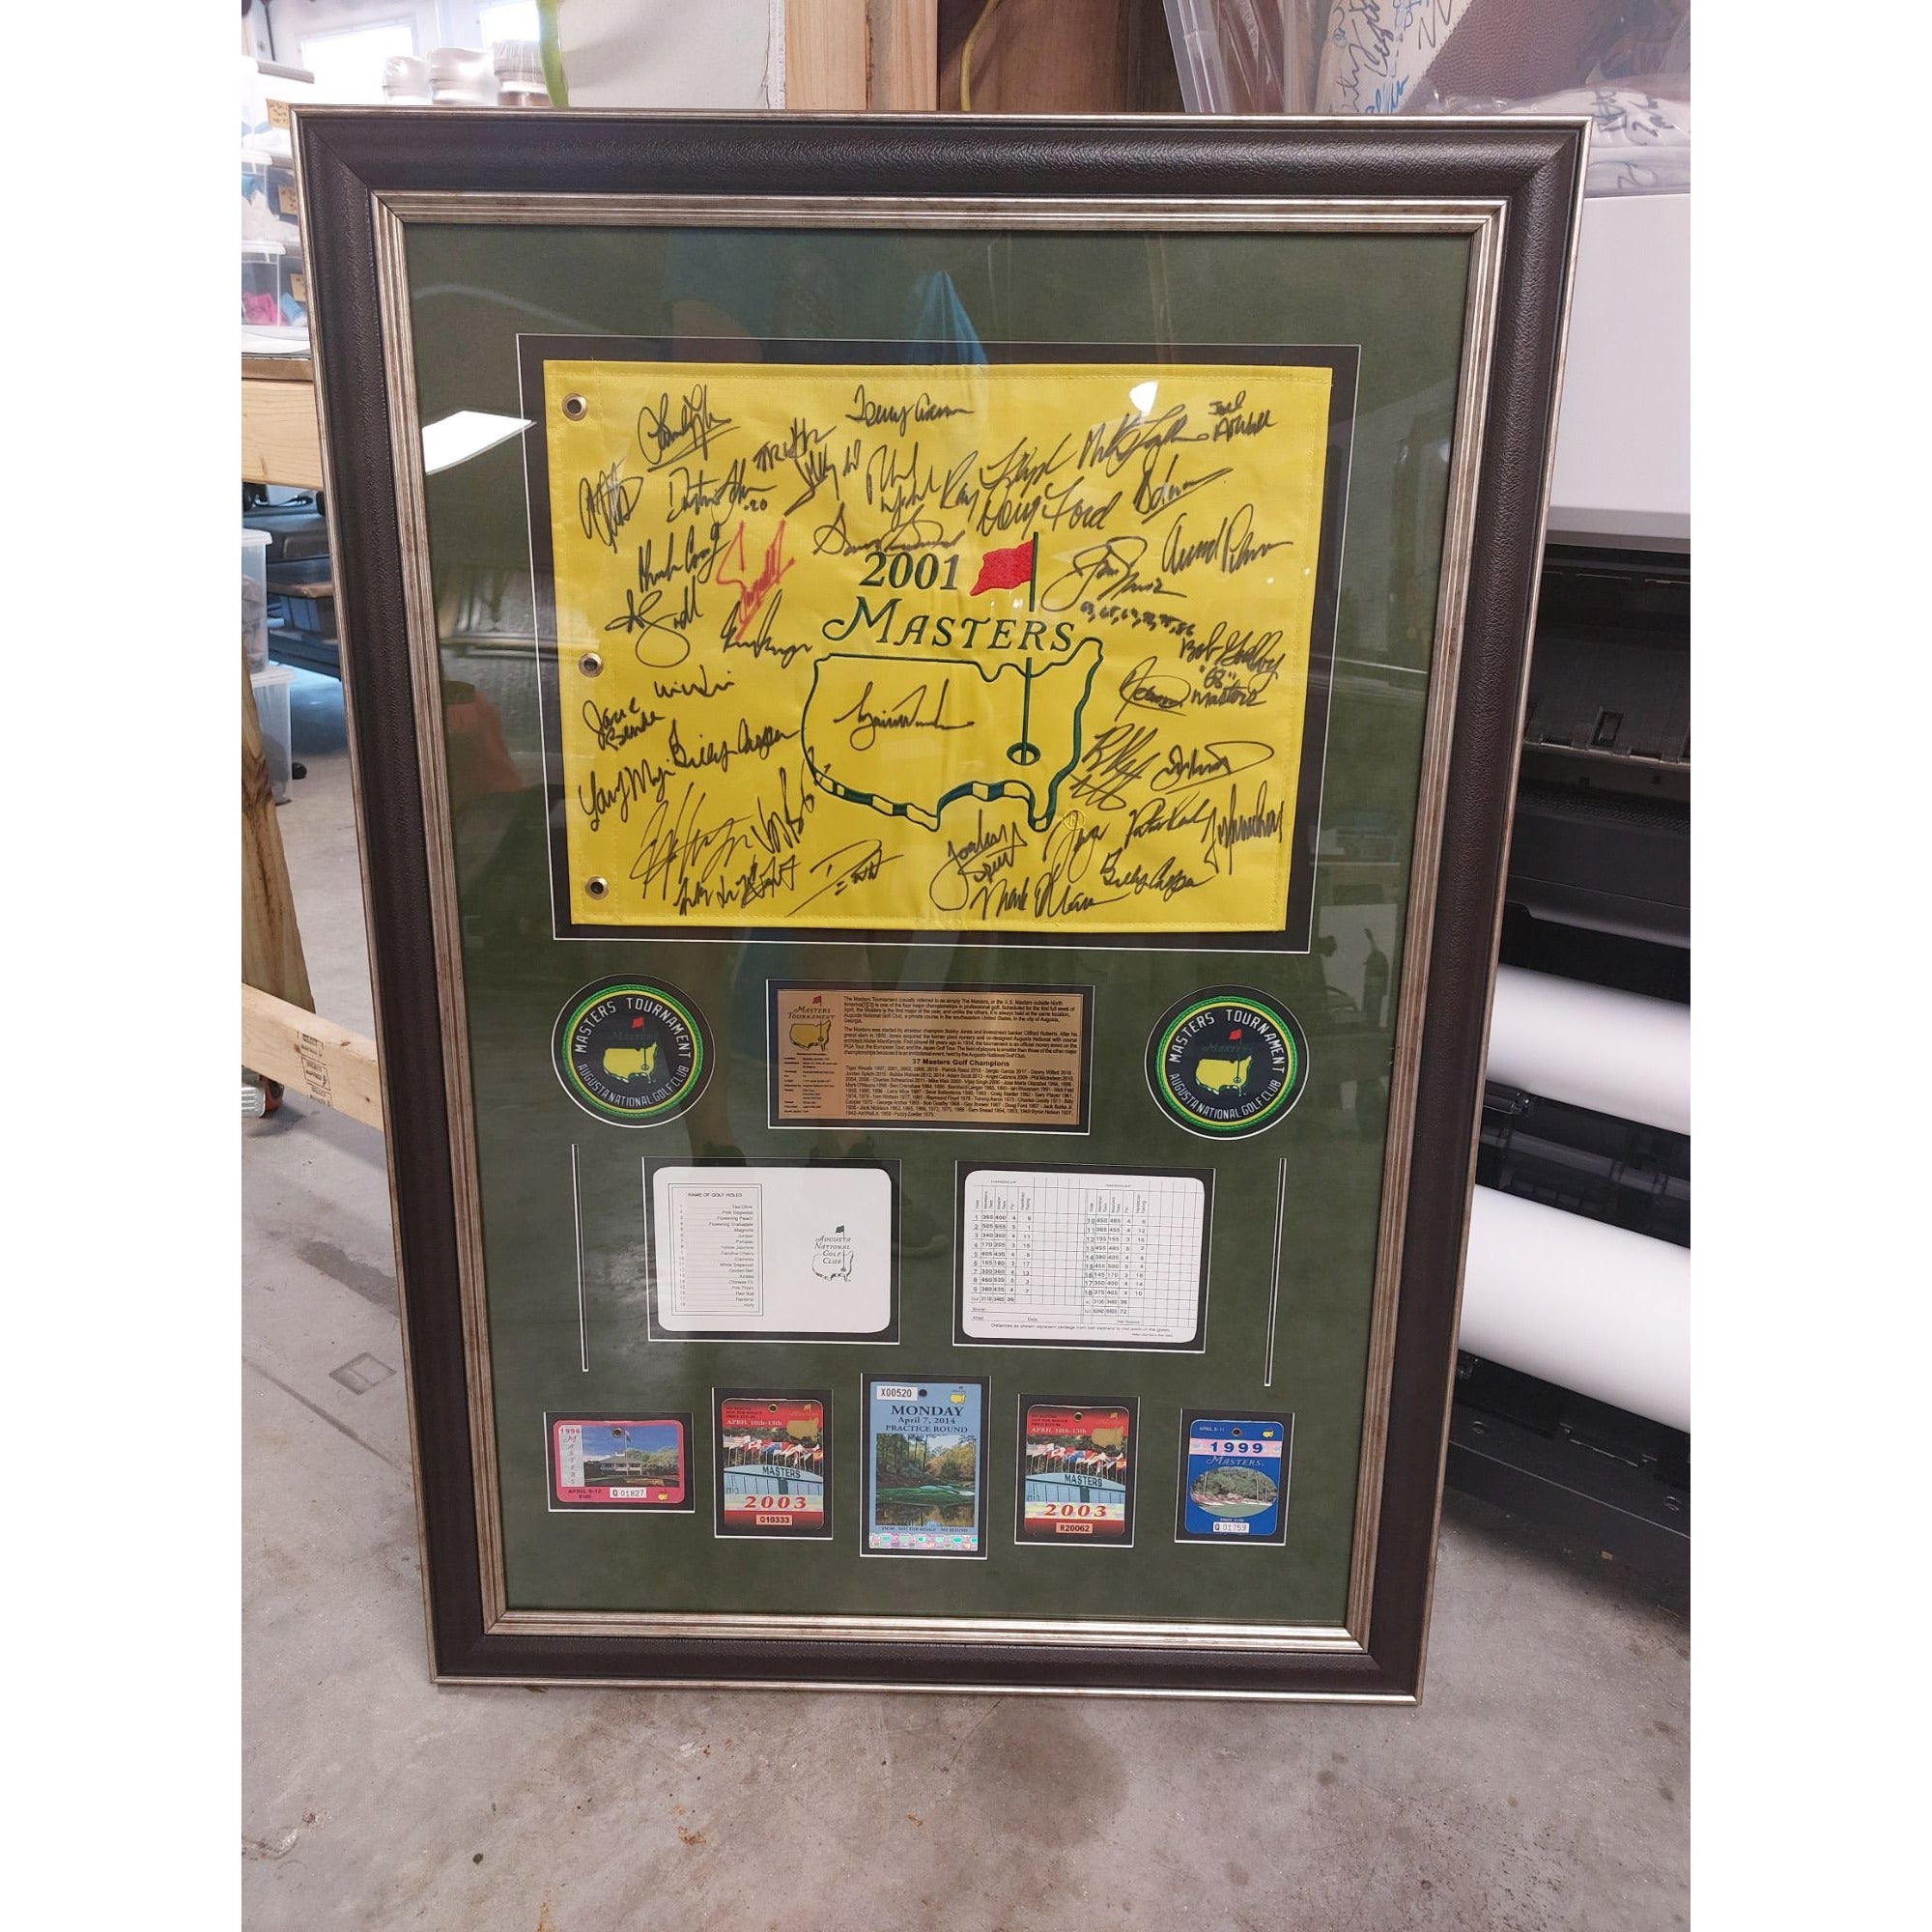 Tiger Woods Sam Sneed Jack Nicklaus Arnold Palmer 37 Masters champions signed and framed Masters flag with proof